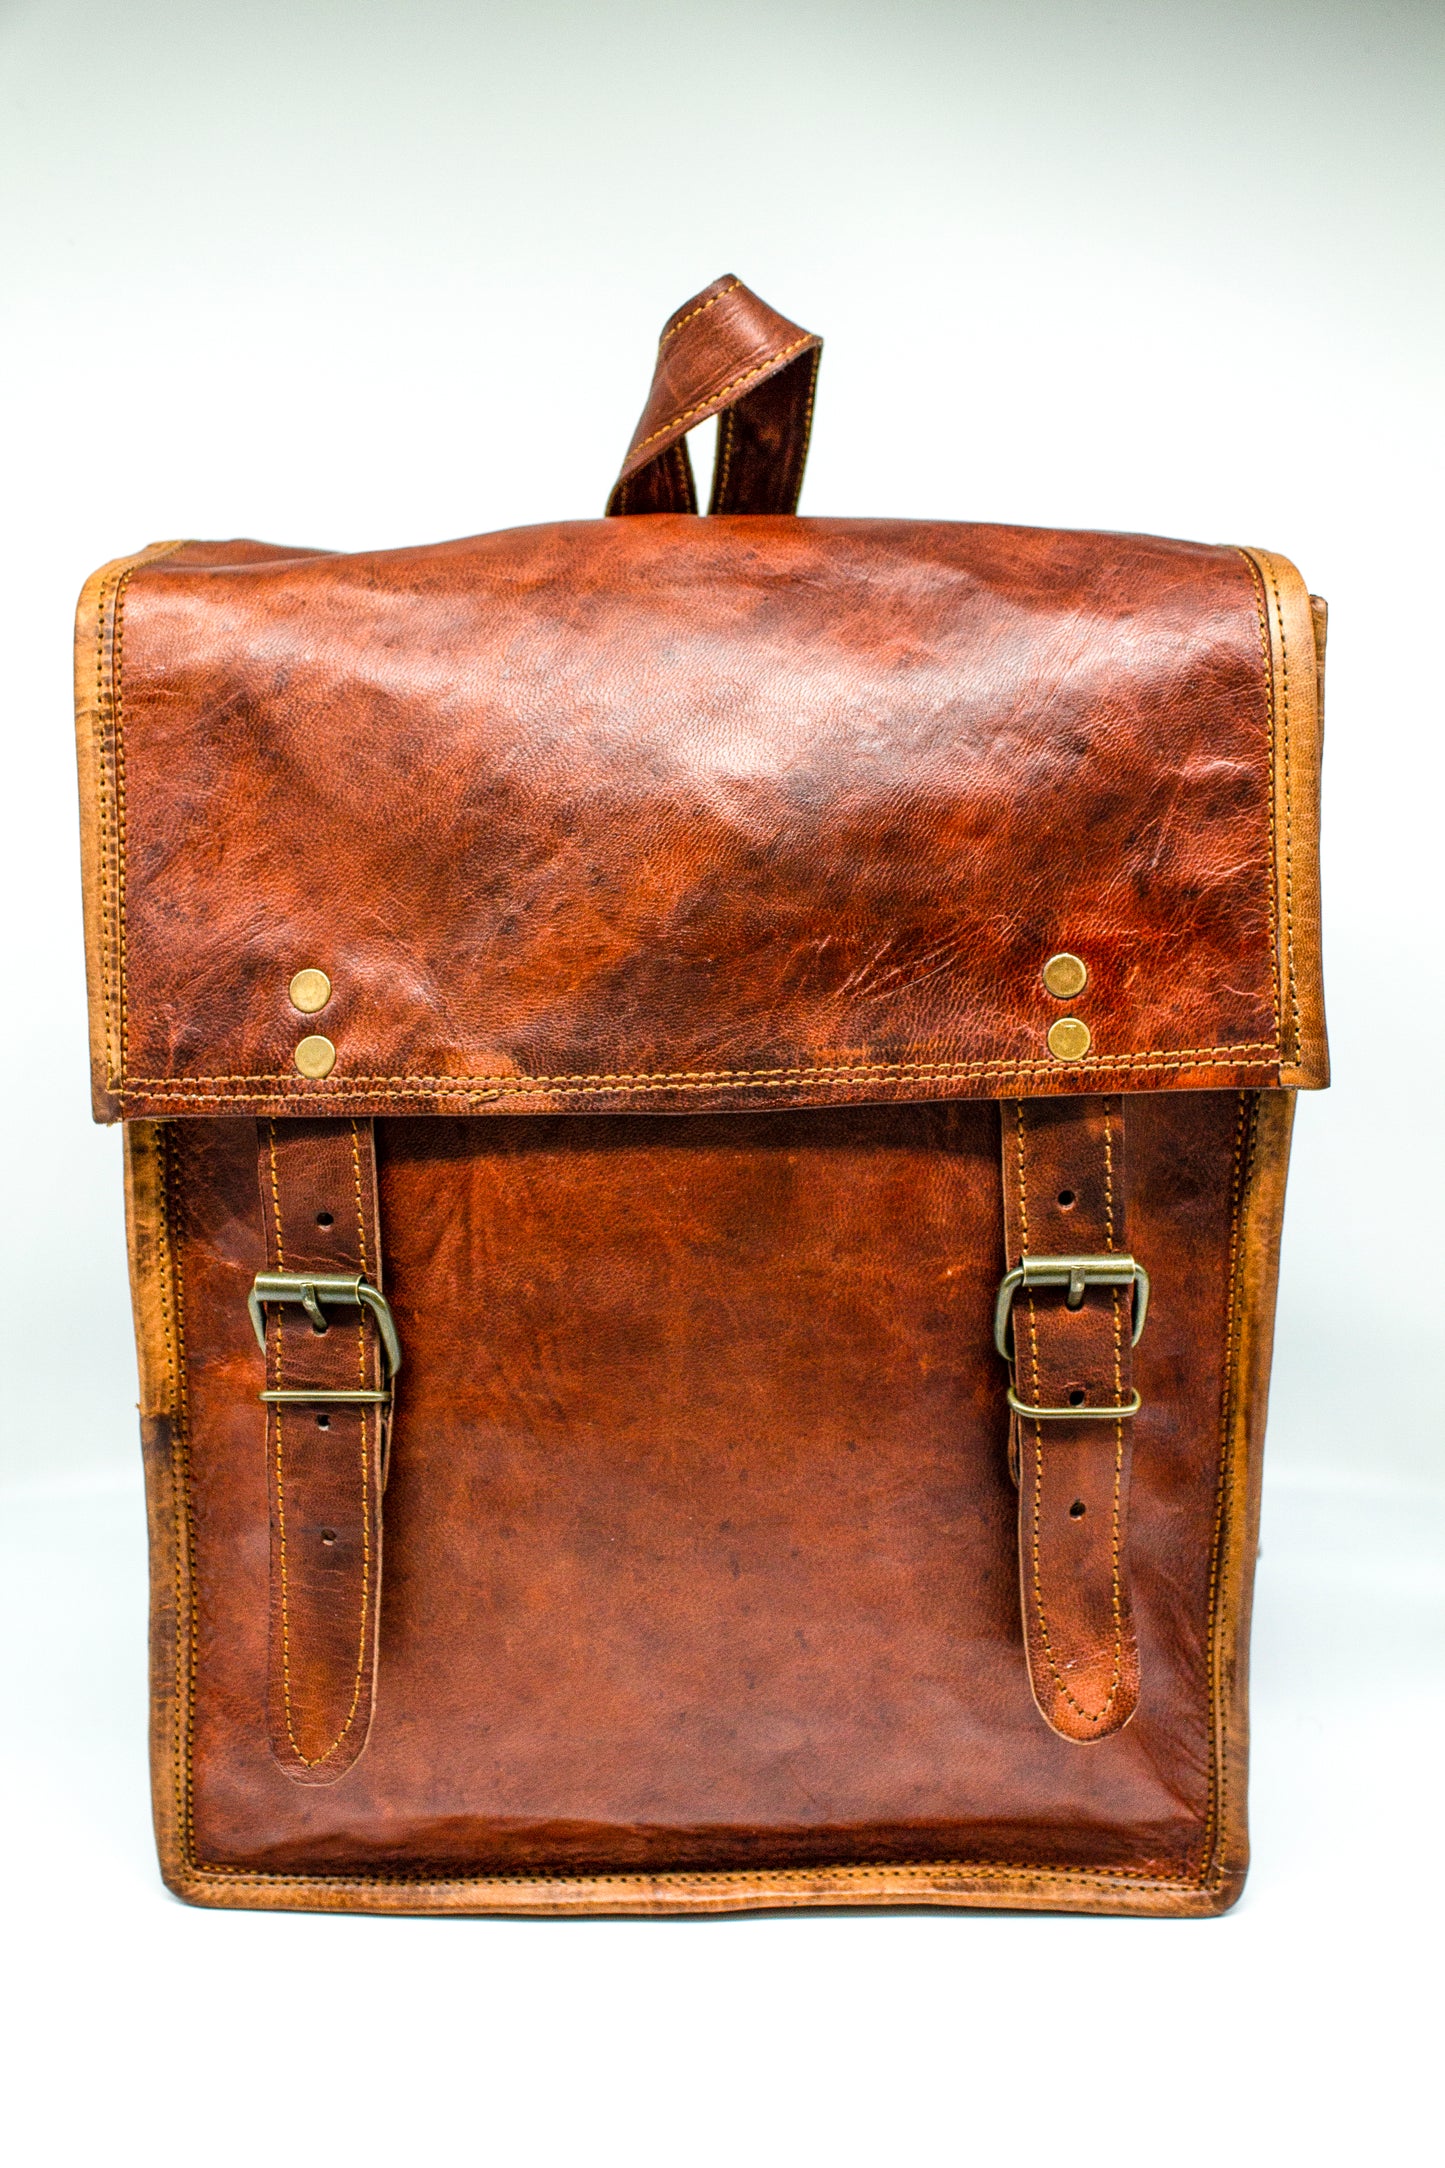 Goat Leather Backpack B12"